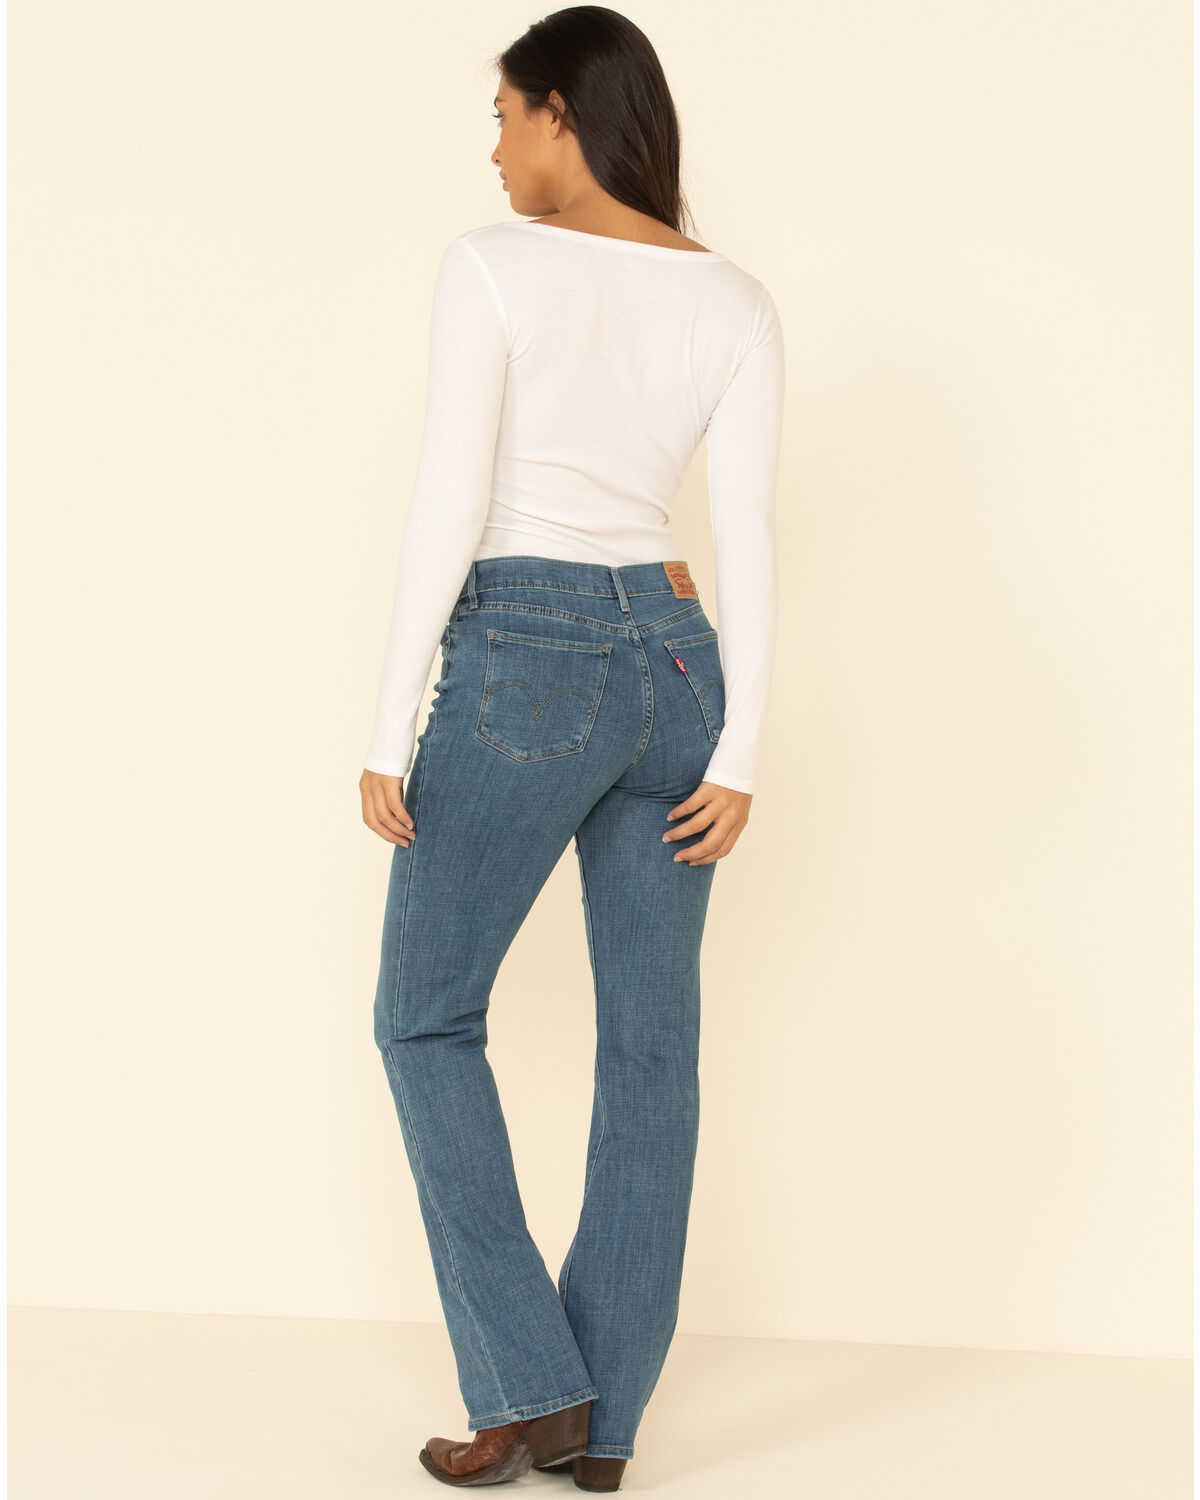 Levi's Womens Classic Bootcut Jeans